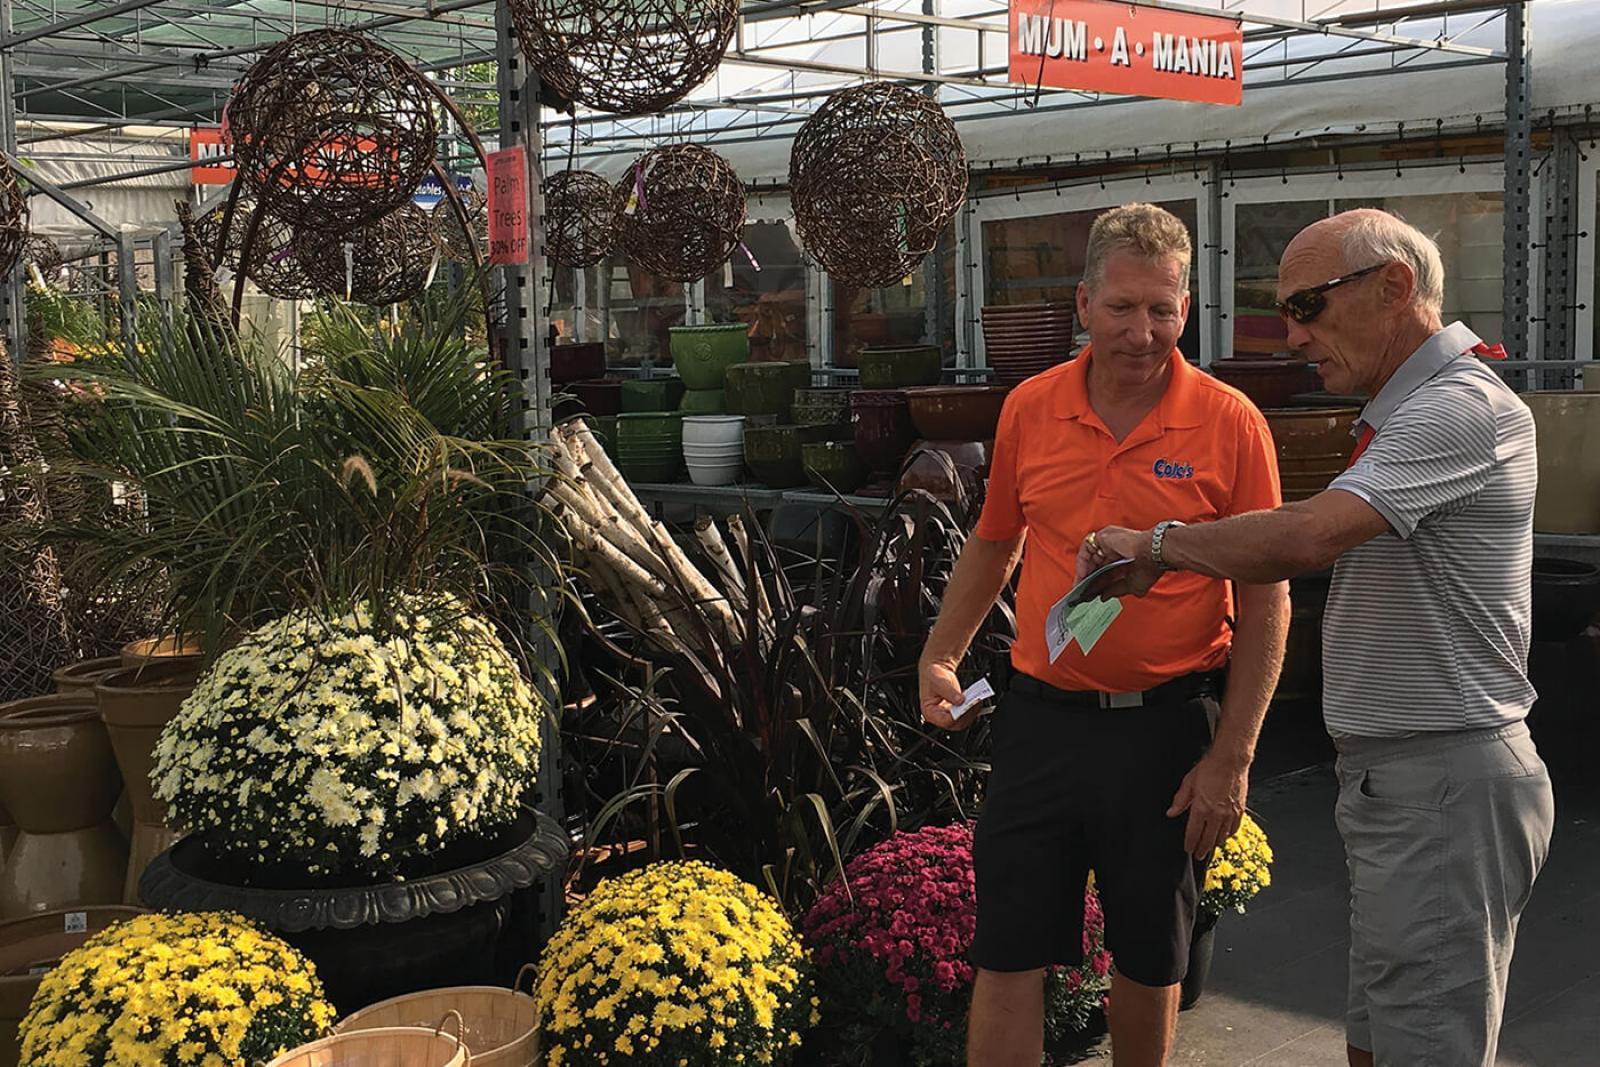 Garden Centres Canada Summit coming this July